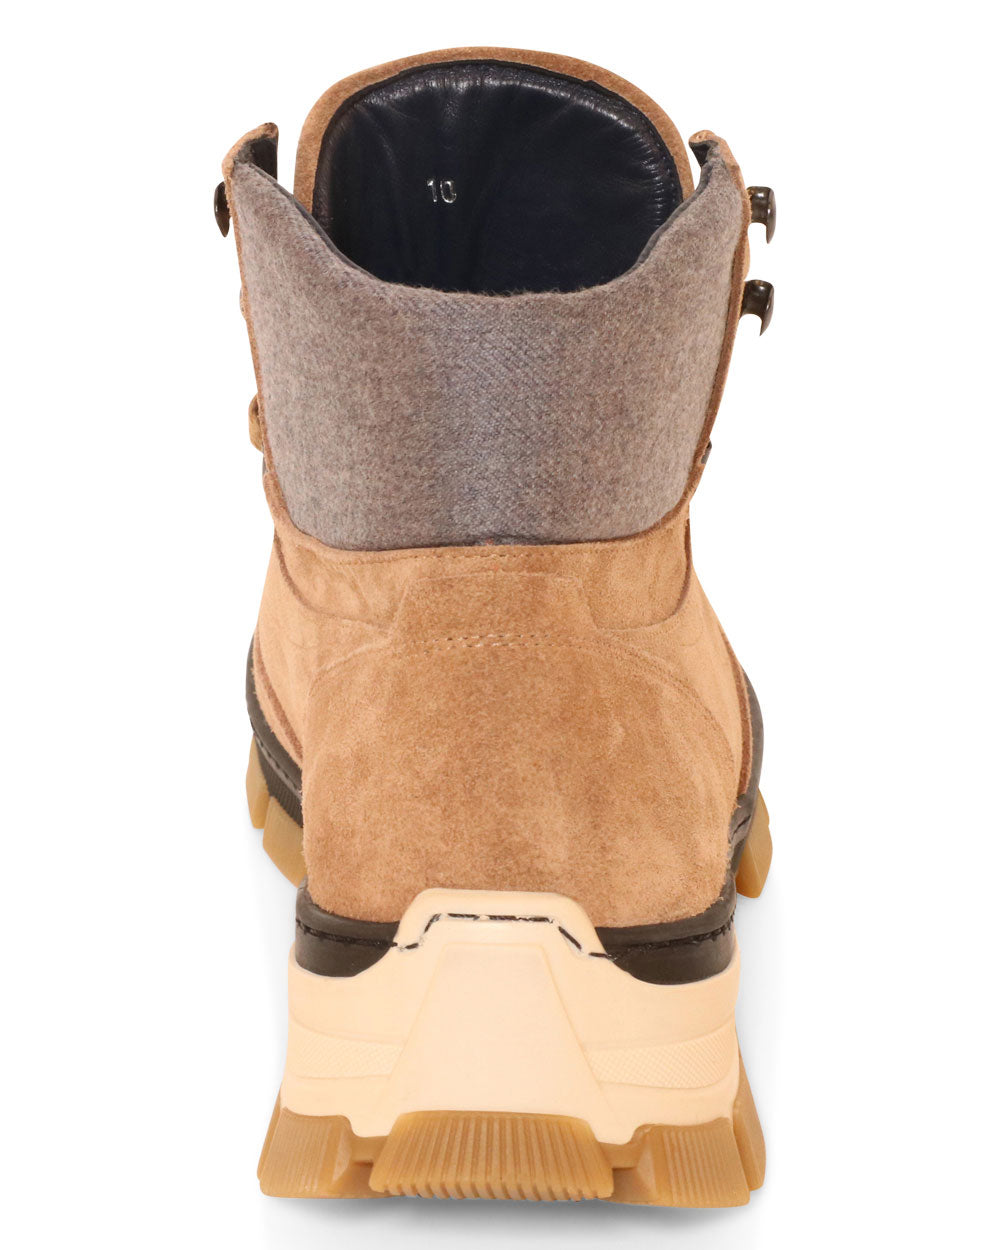 Antelope Livigno Boot in Taupe